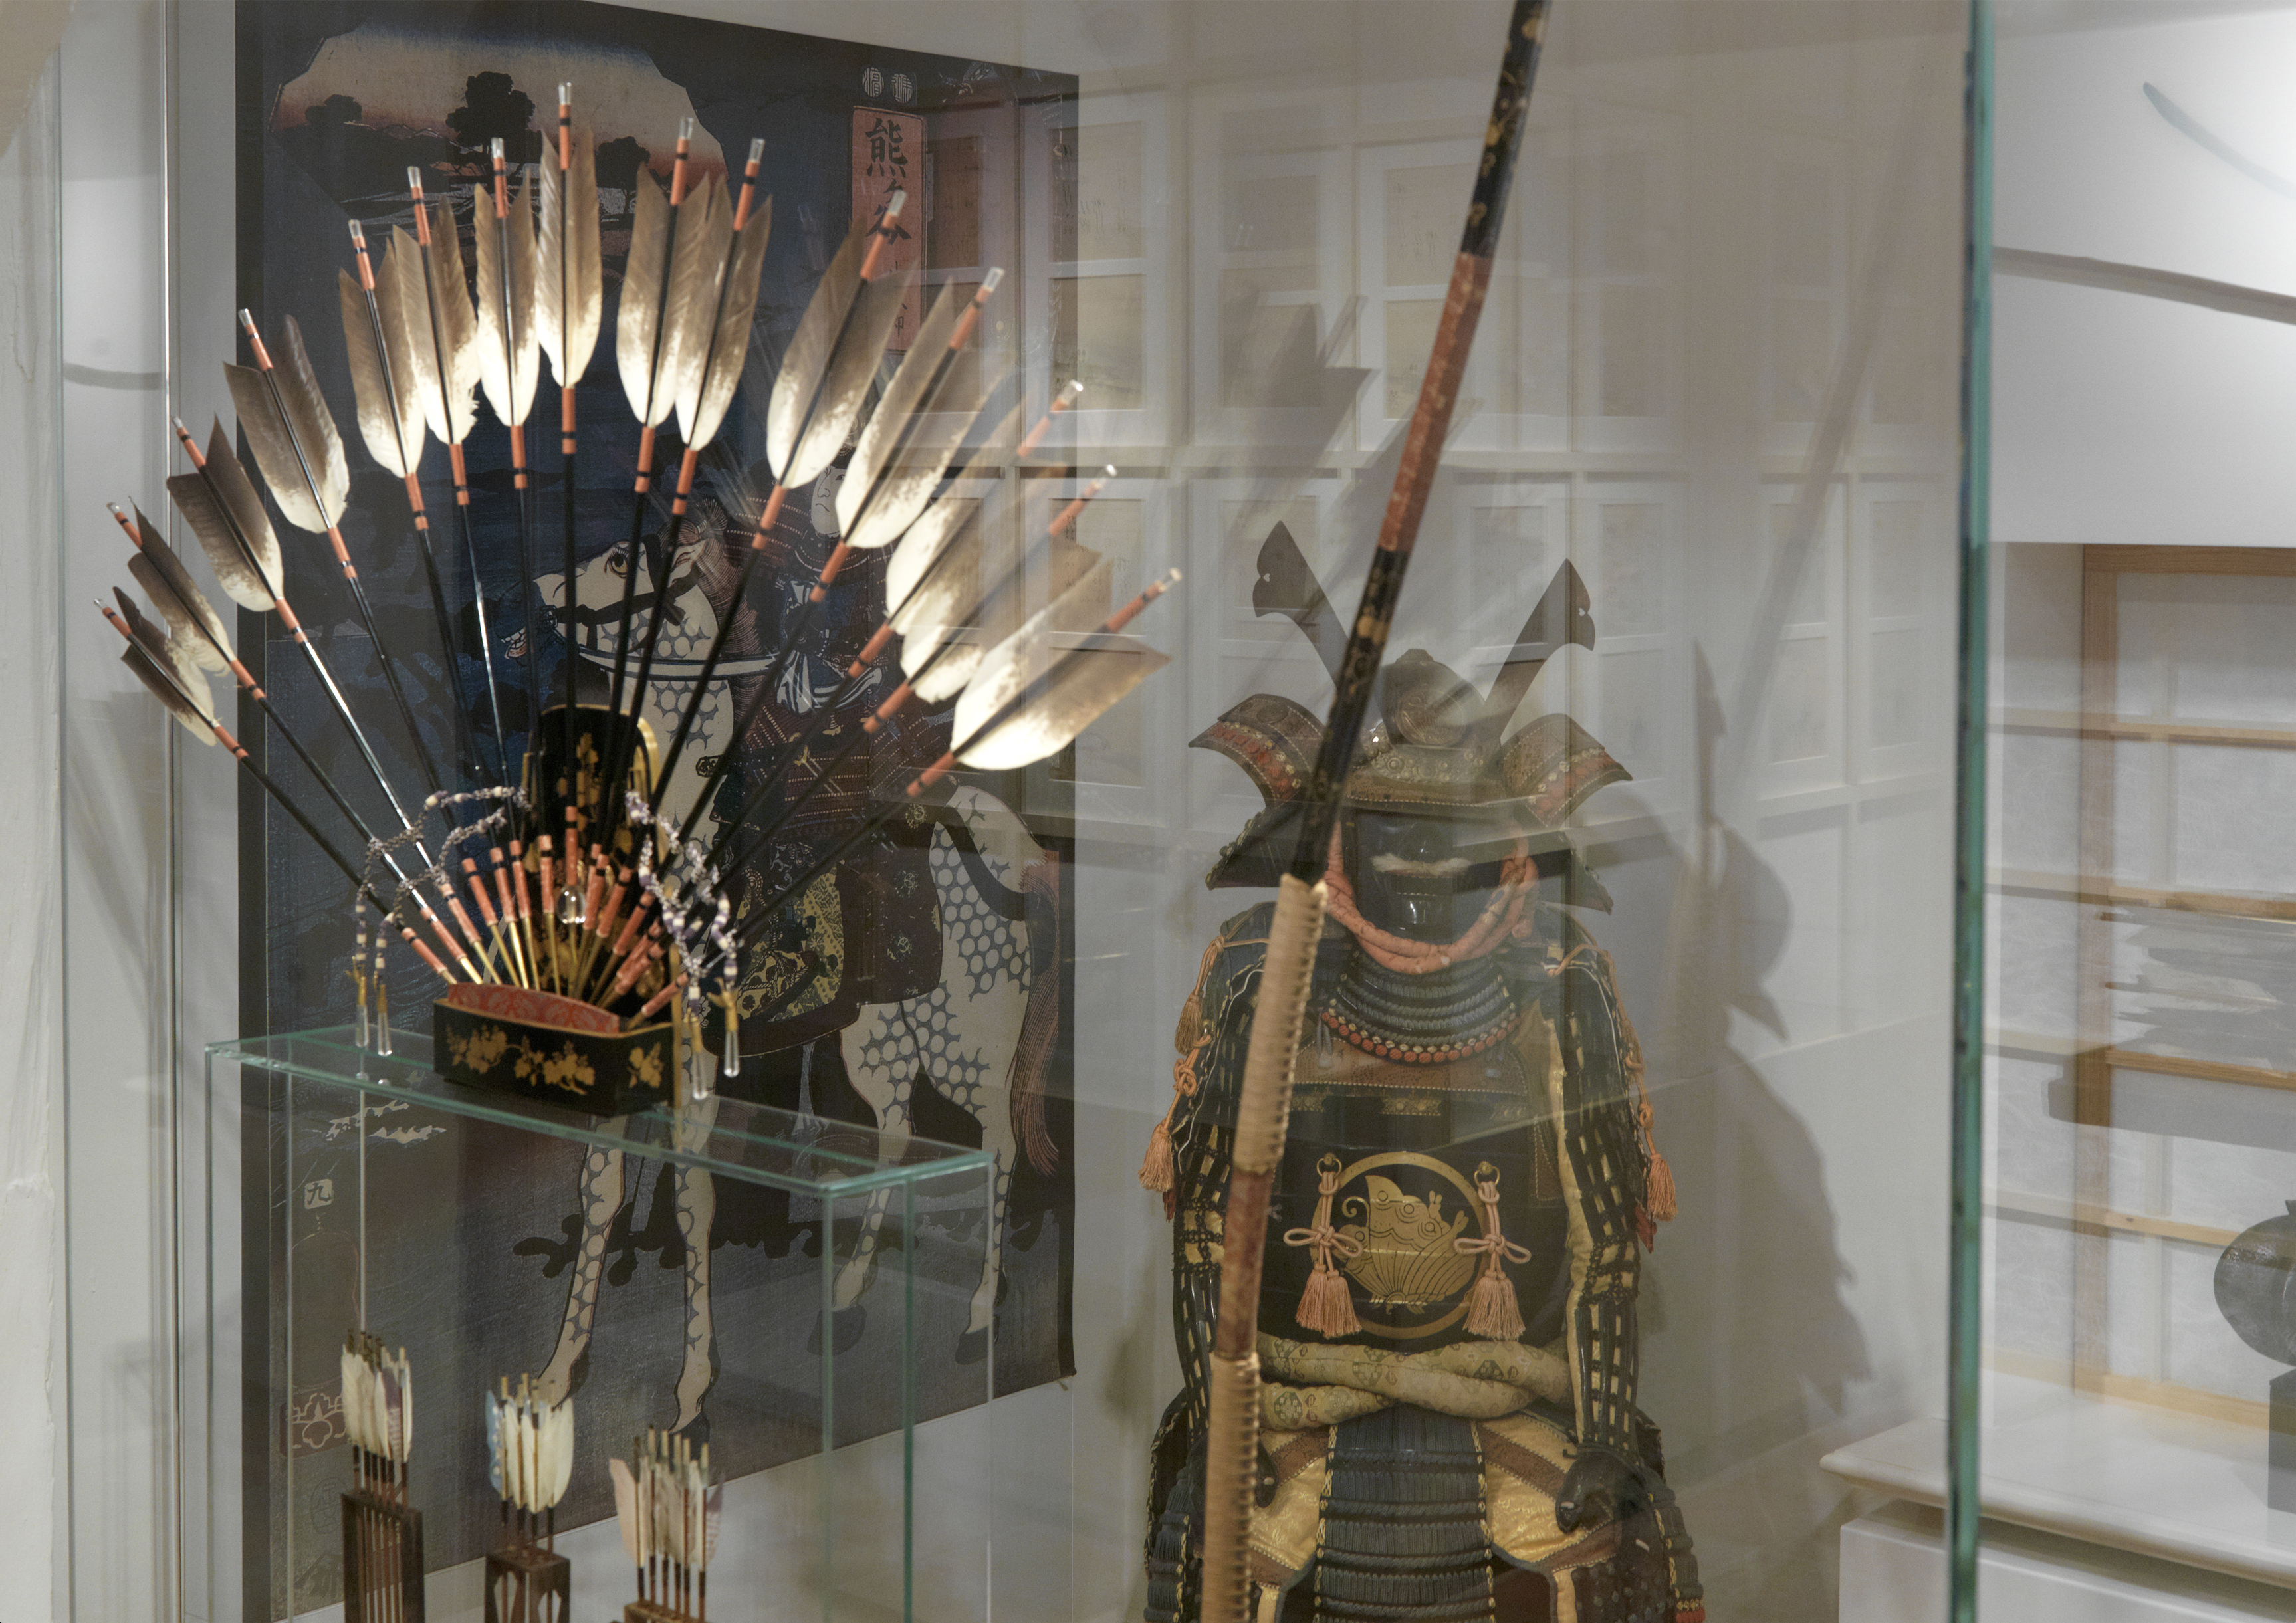 A set of ceremonial archery equipment for the enthronement ceremony of the Taisho Emperor